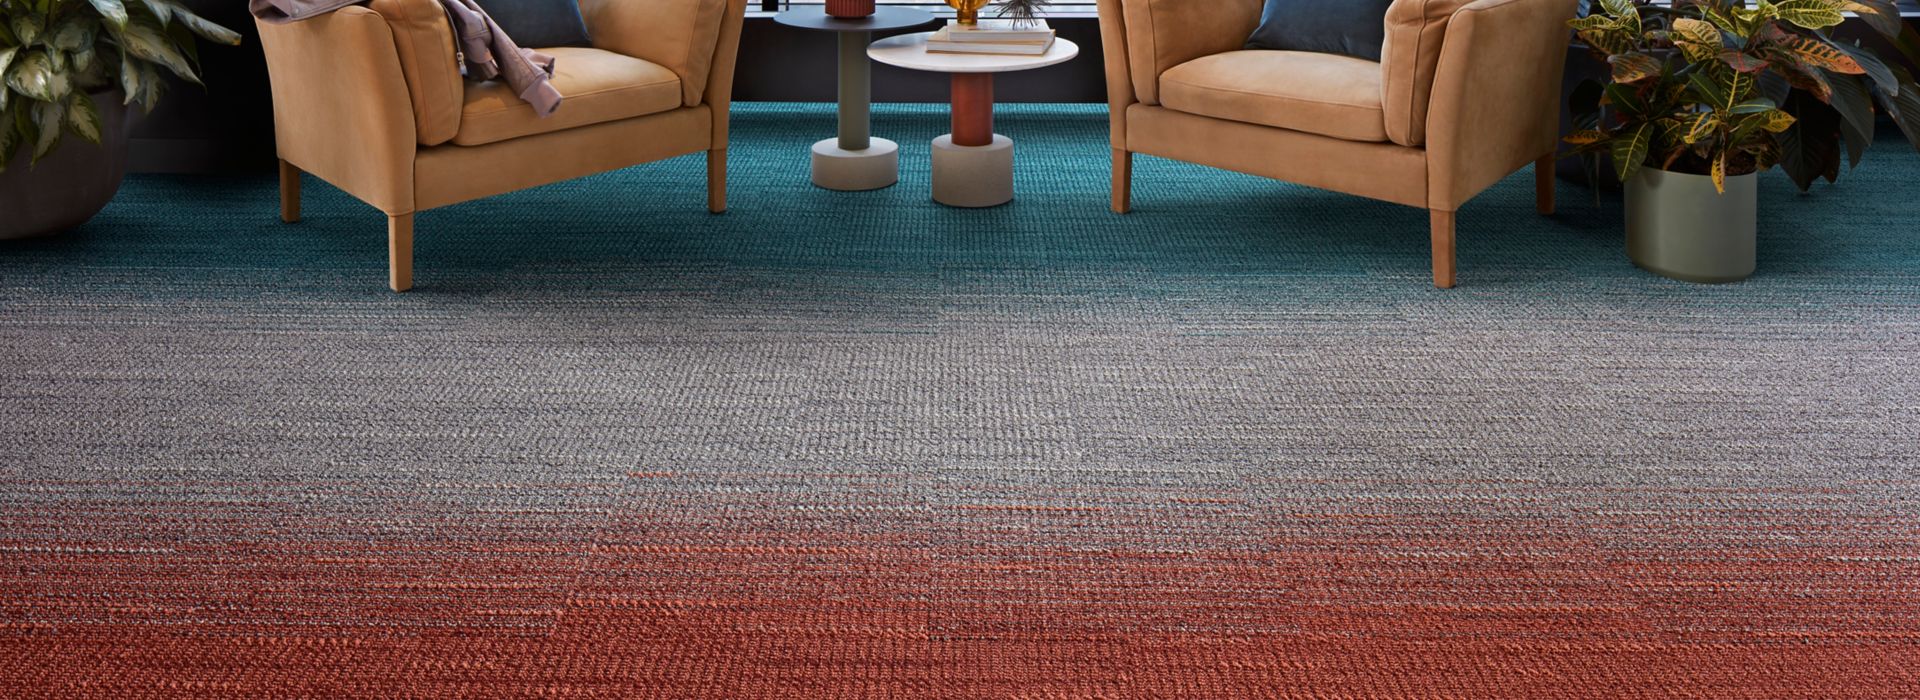 Interface WG100 and WG200 carpet tile in lobby numéro d’image 1